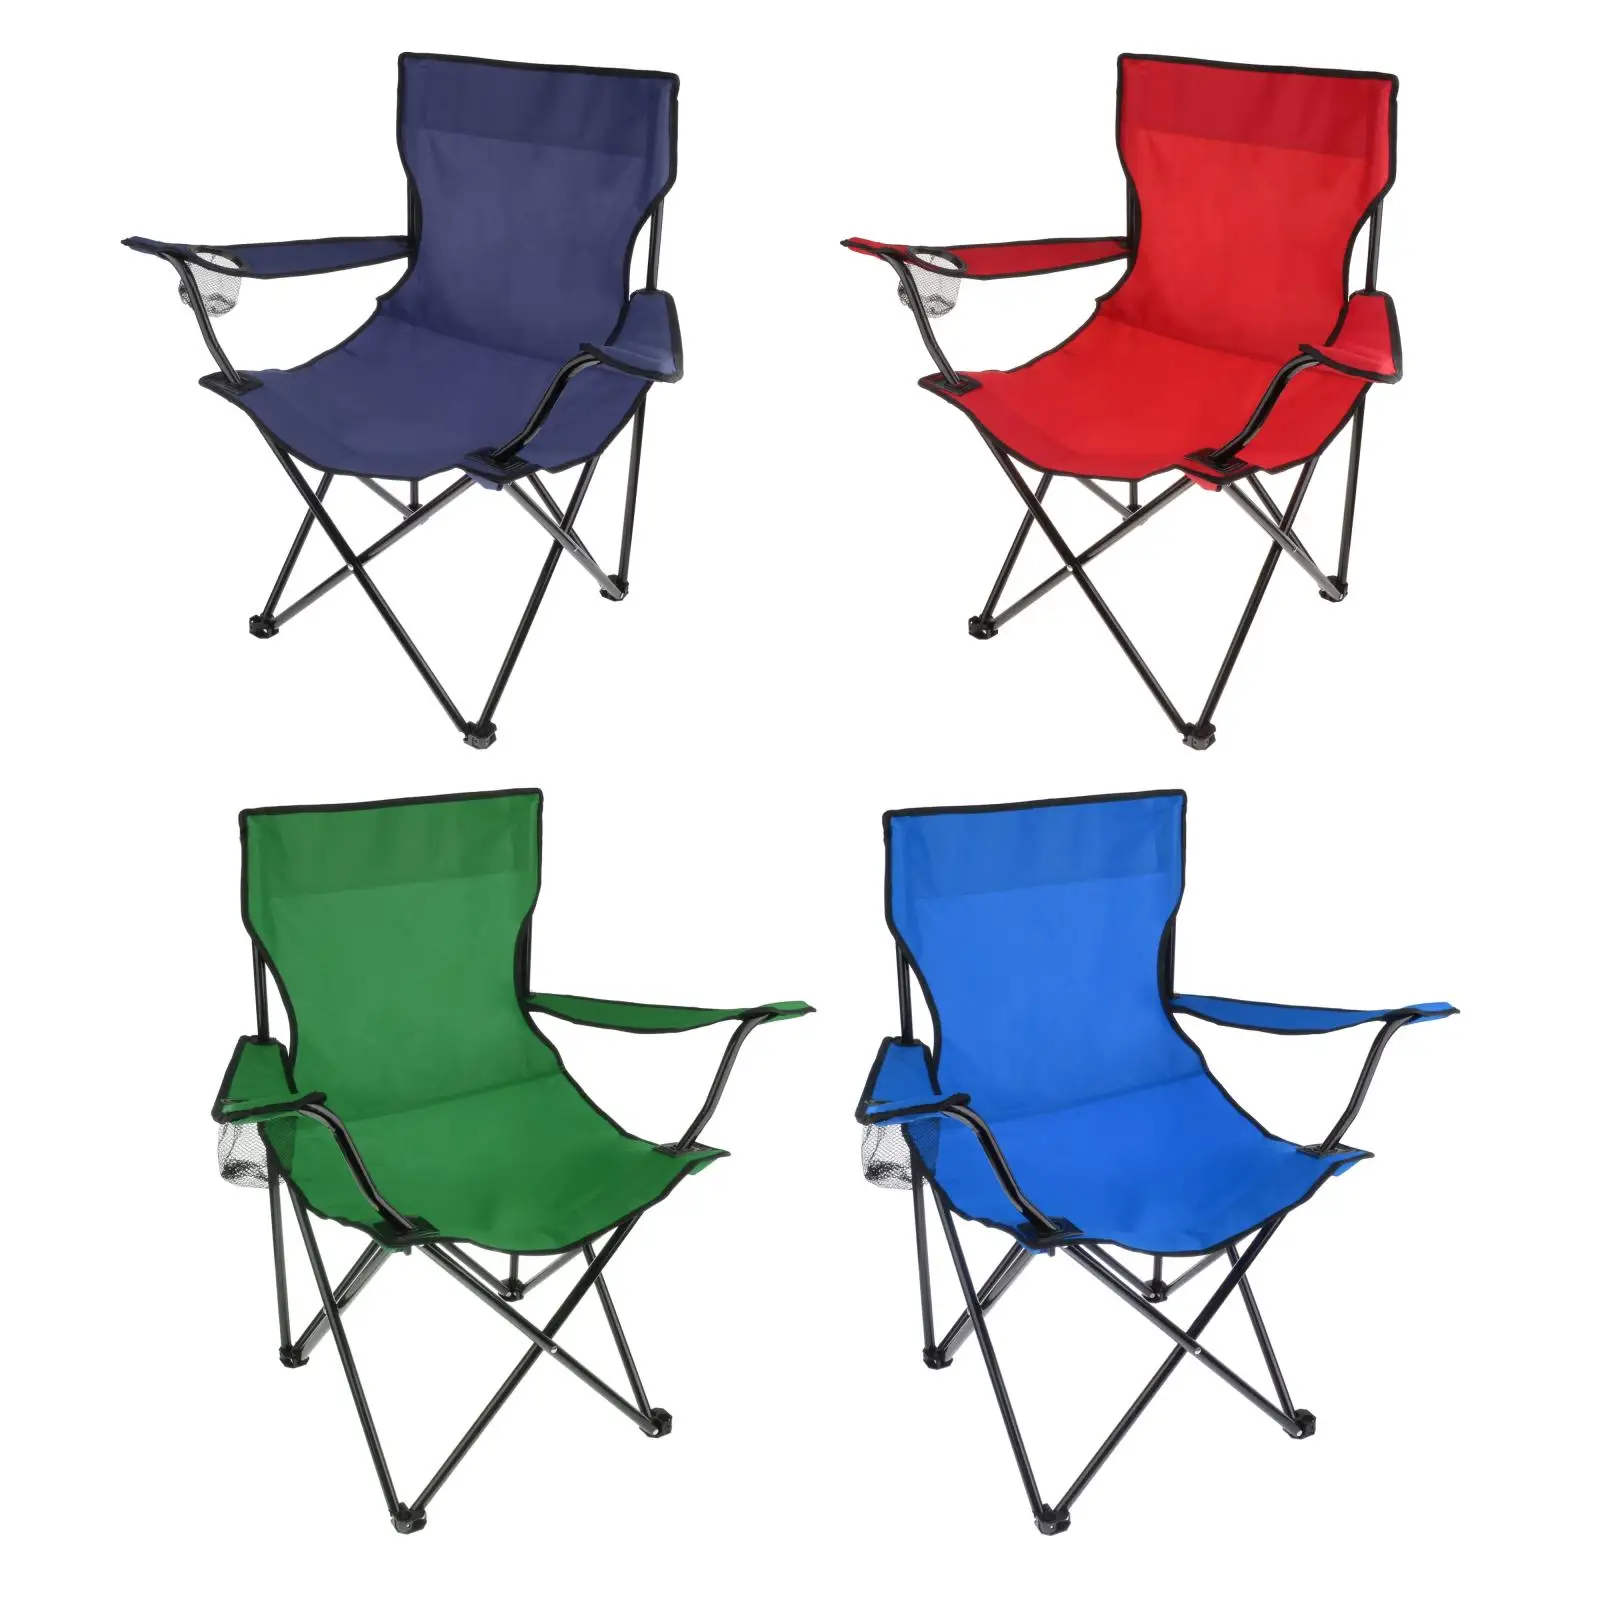 Patio Furniture Folding Camping Chair Beach Fishing Picnic Camp Seat Cup Holder